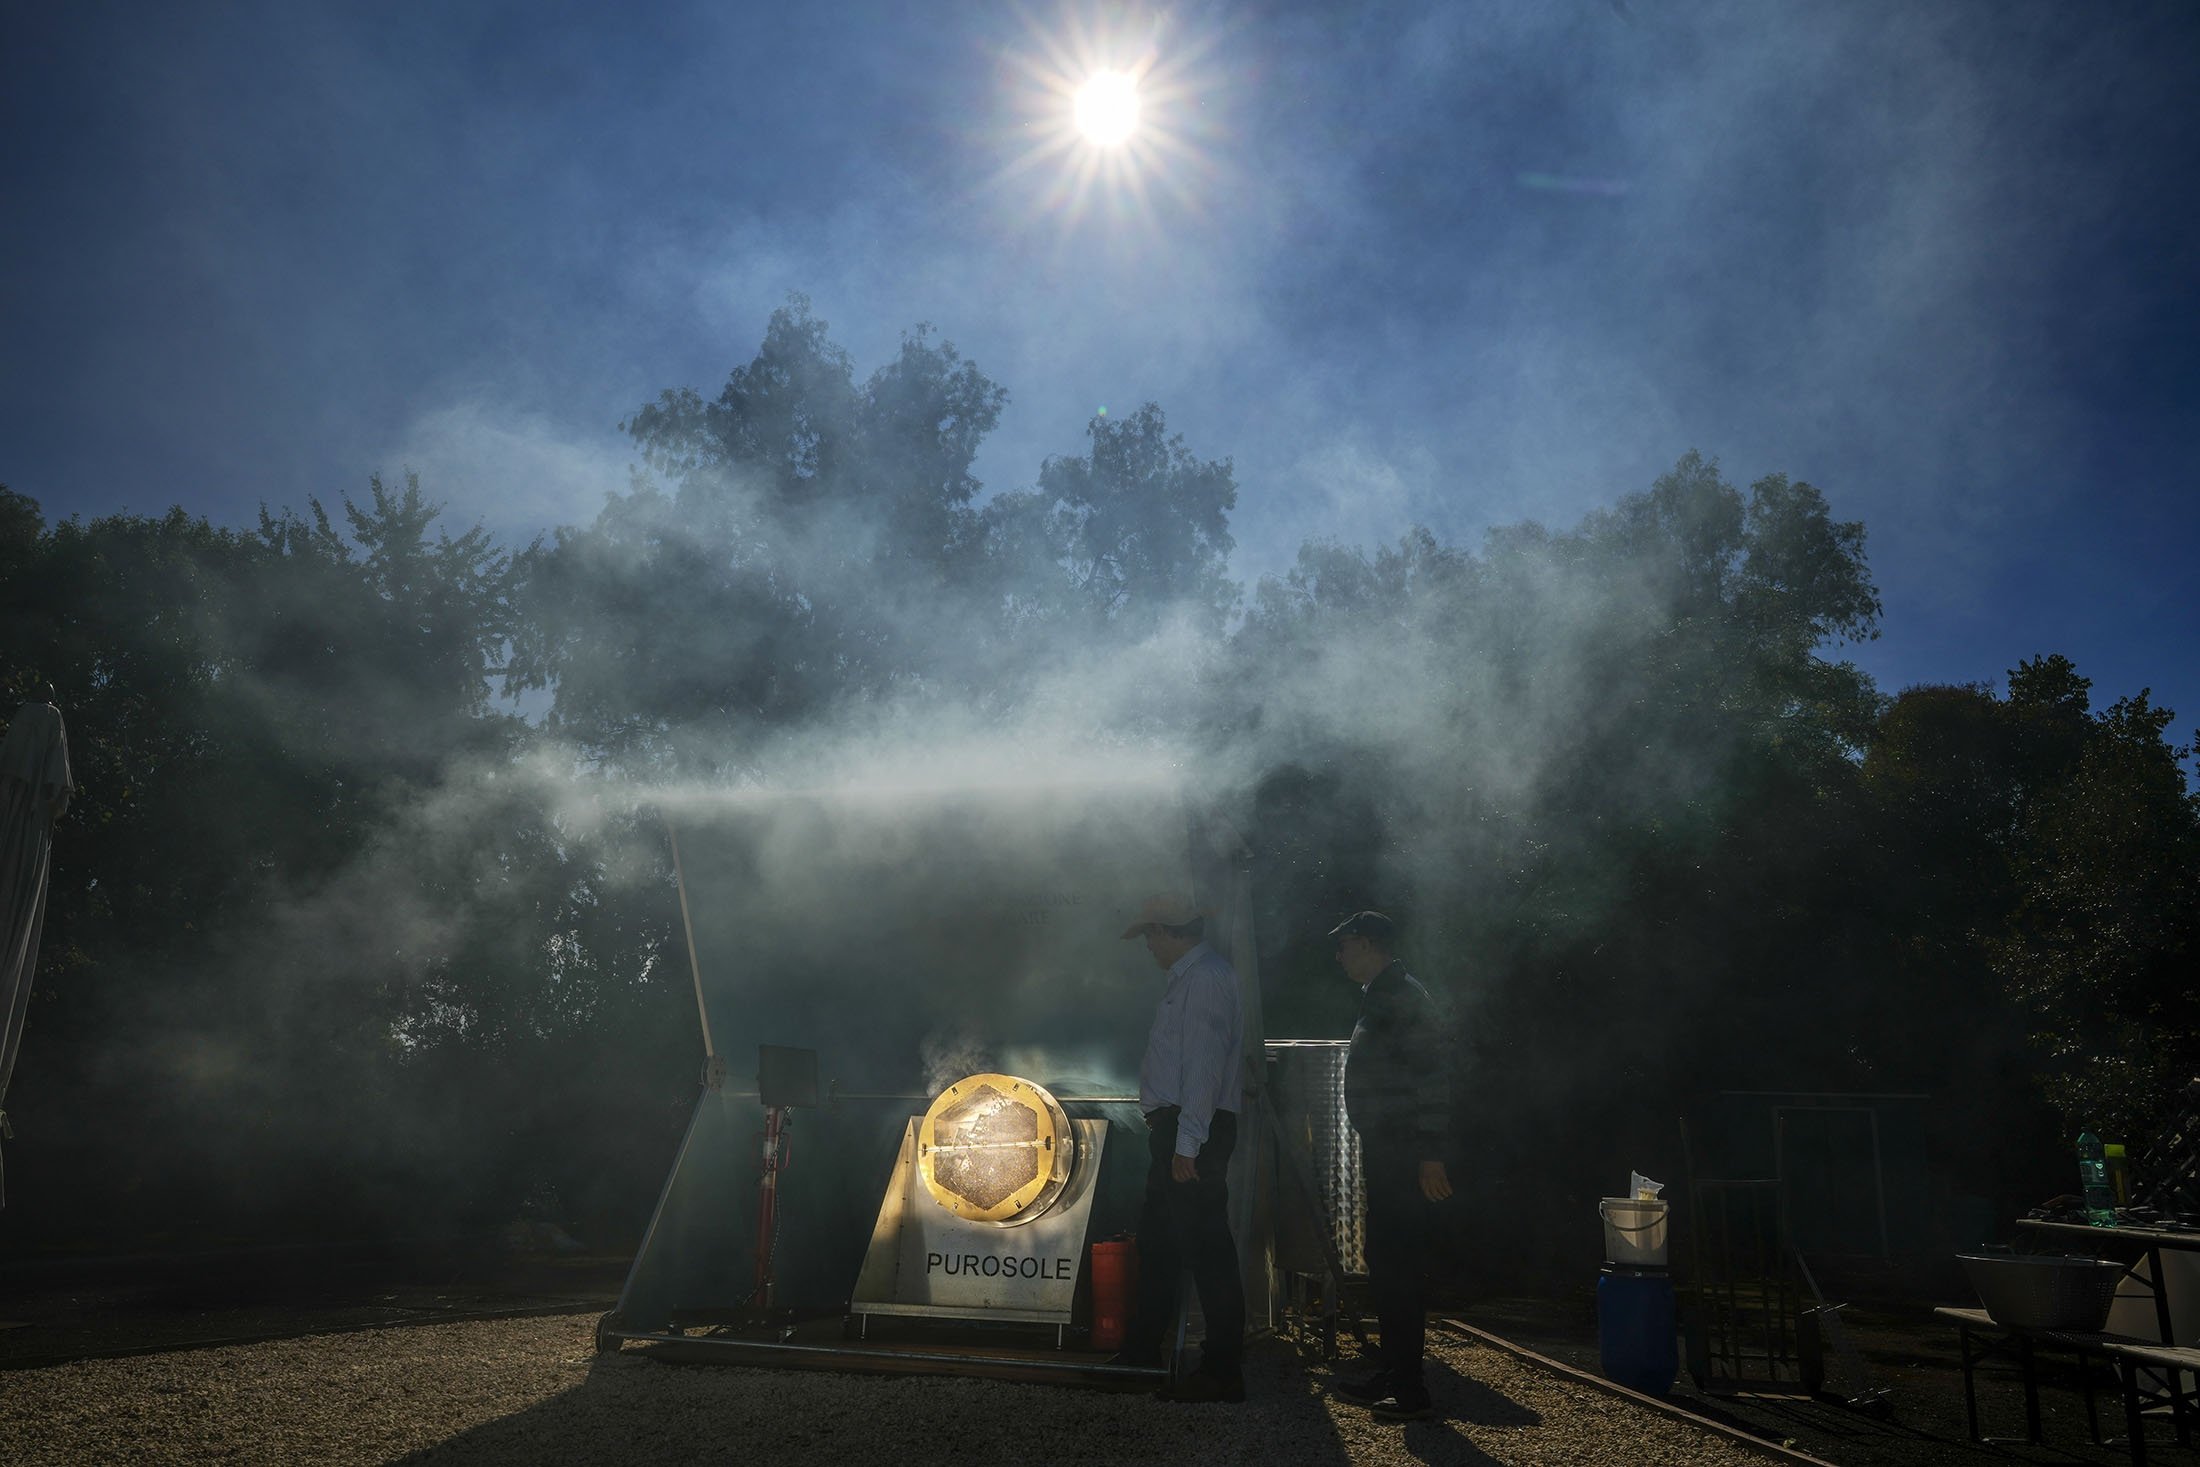 Antonio Durbe (L) and Daniele Tummei monitor the functioning of the "Purosole," or Pure Sun, solar light coffee roaster, in Rome, Italy, Oct. 13, 2021. (AP Photo)